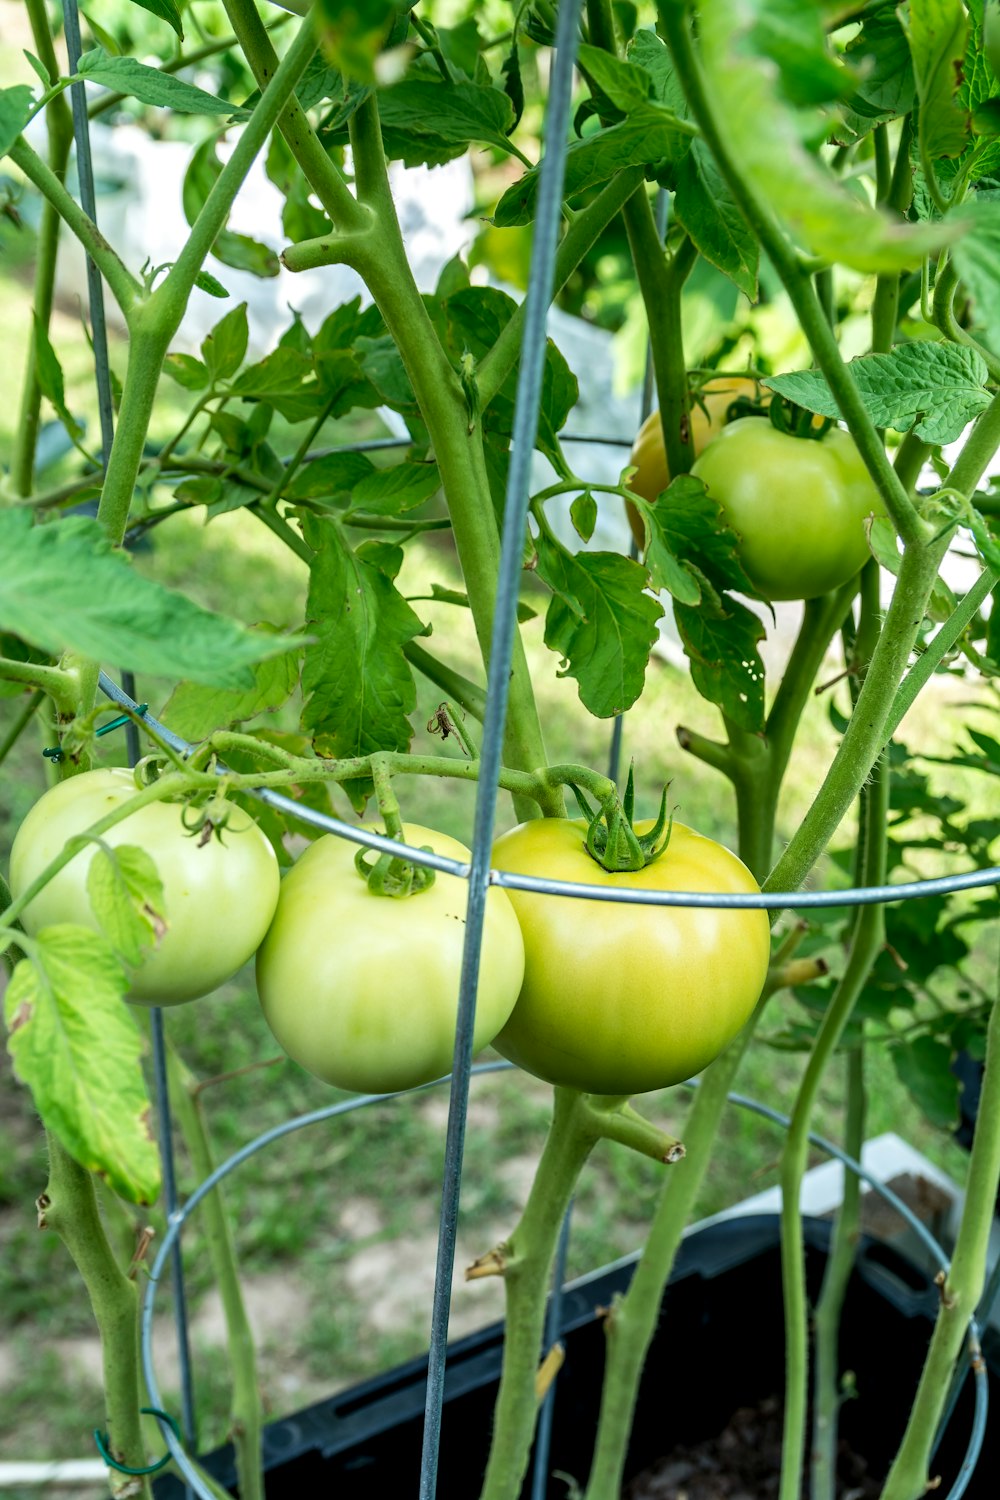 a group of tomatoes growing on a vine